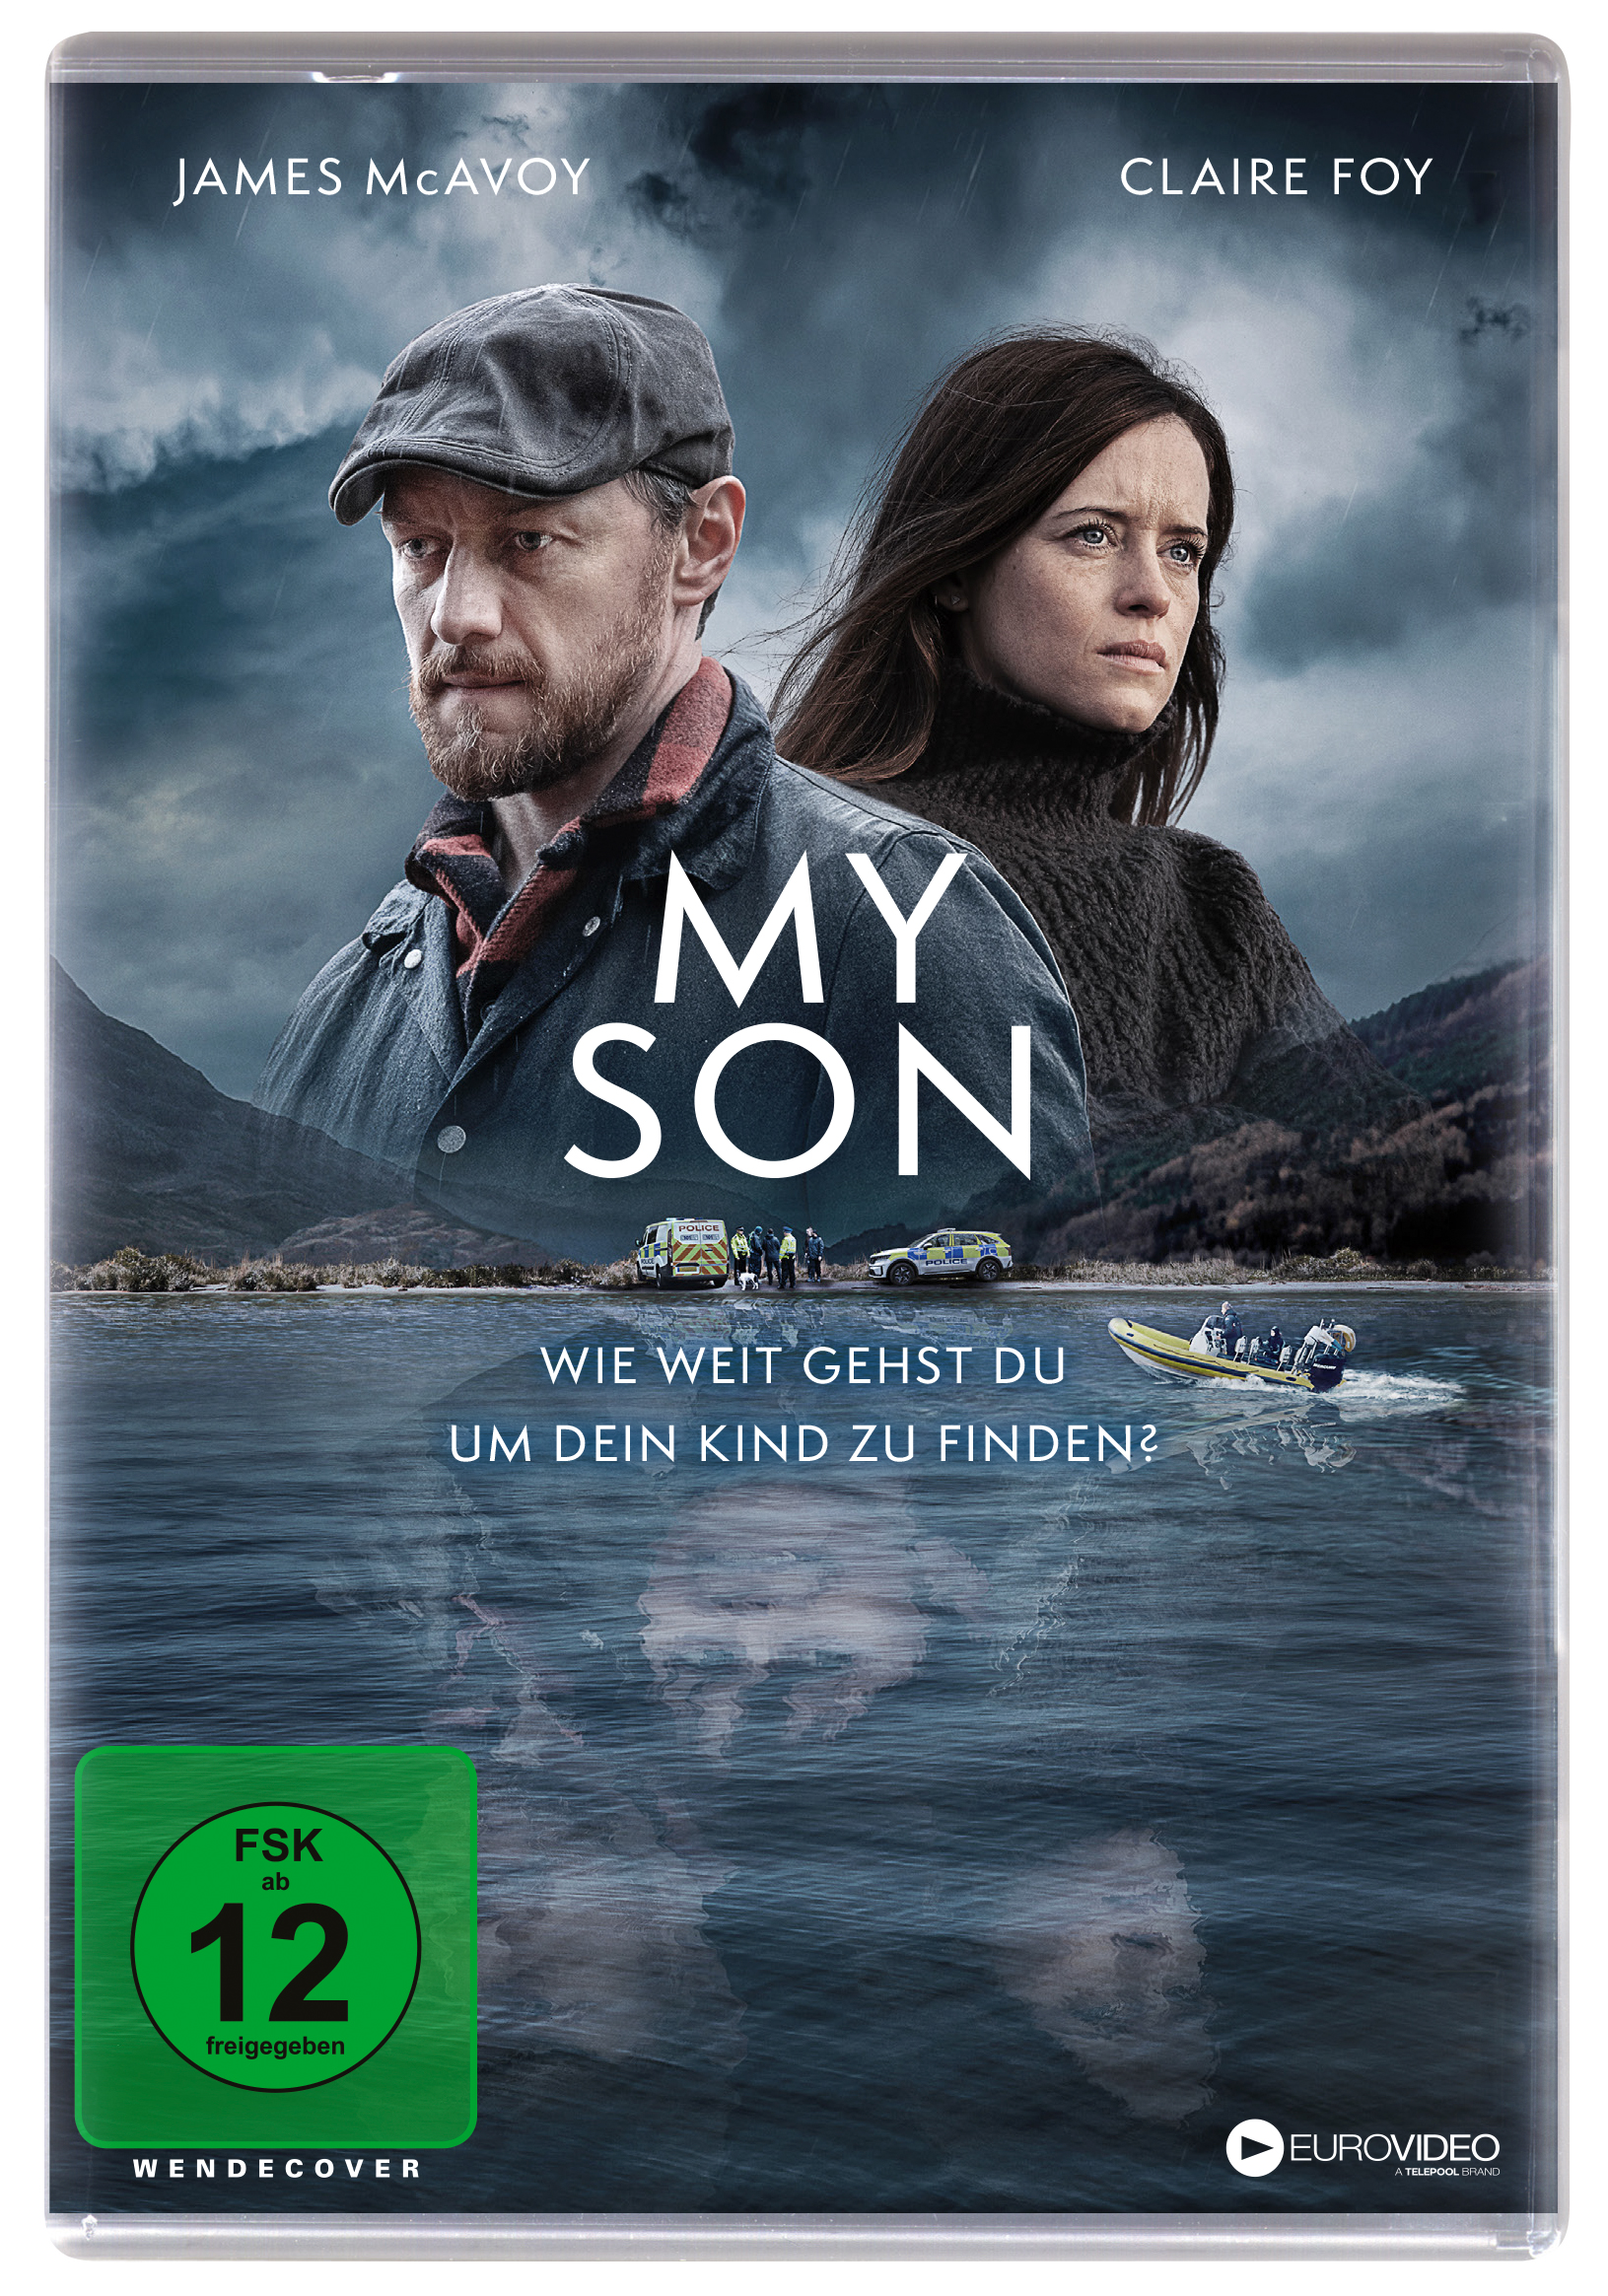 My Son DVD Cover